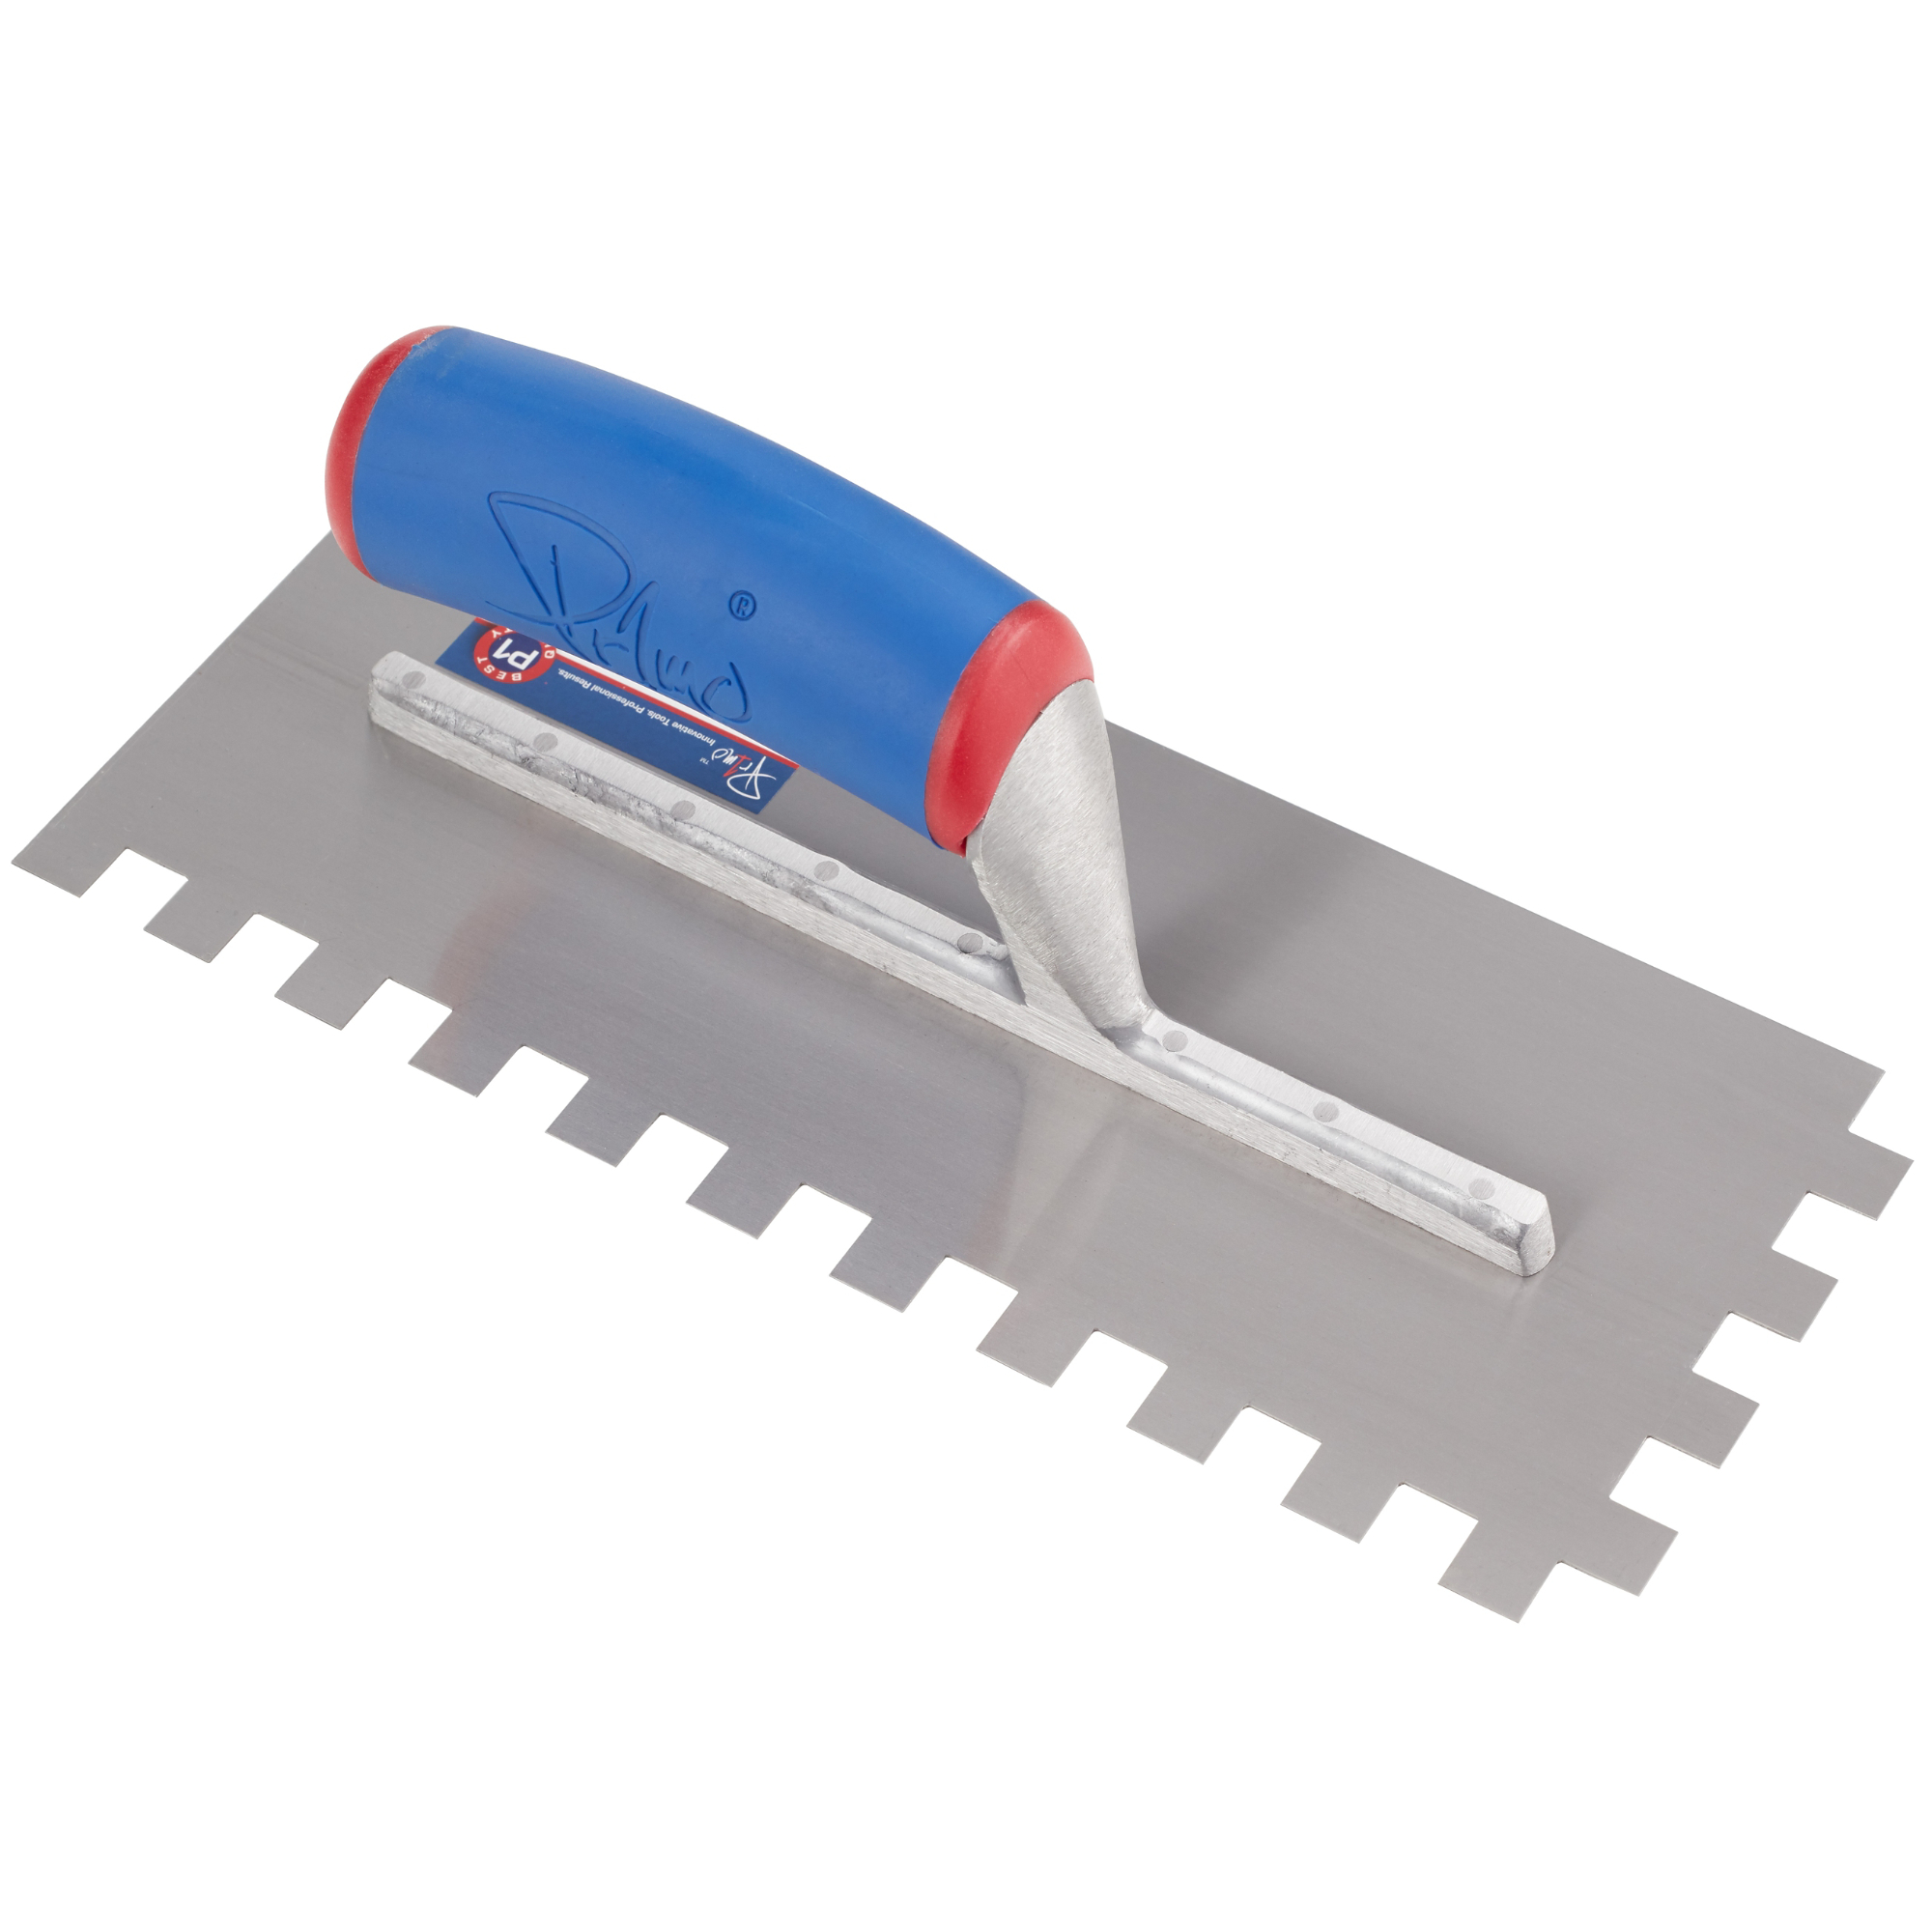 Primo Trowel 1/2" Square-Riveted